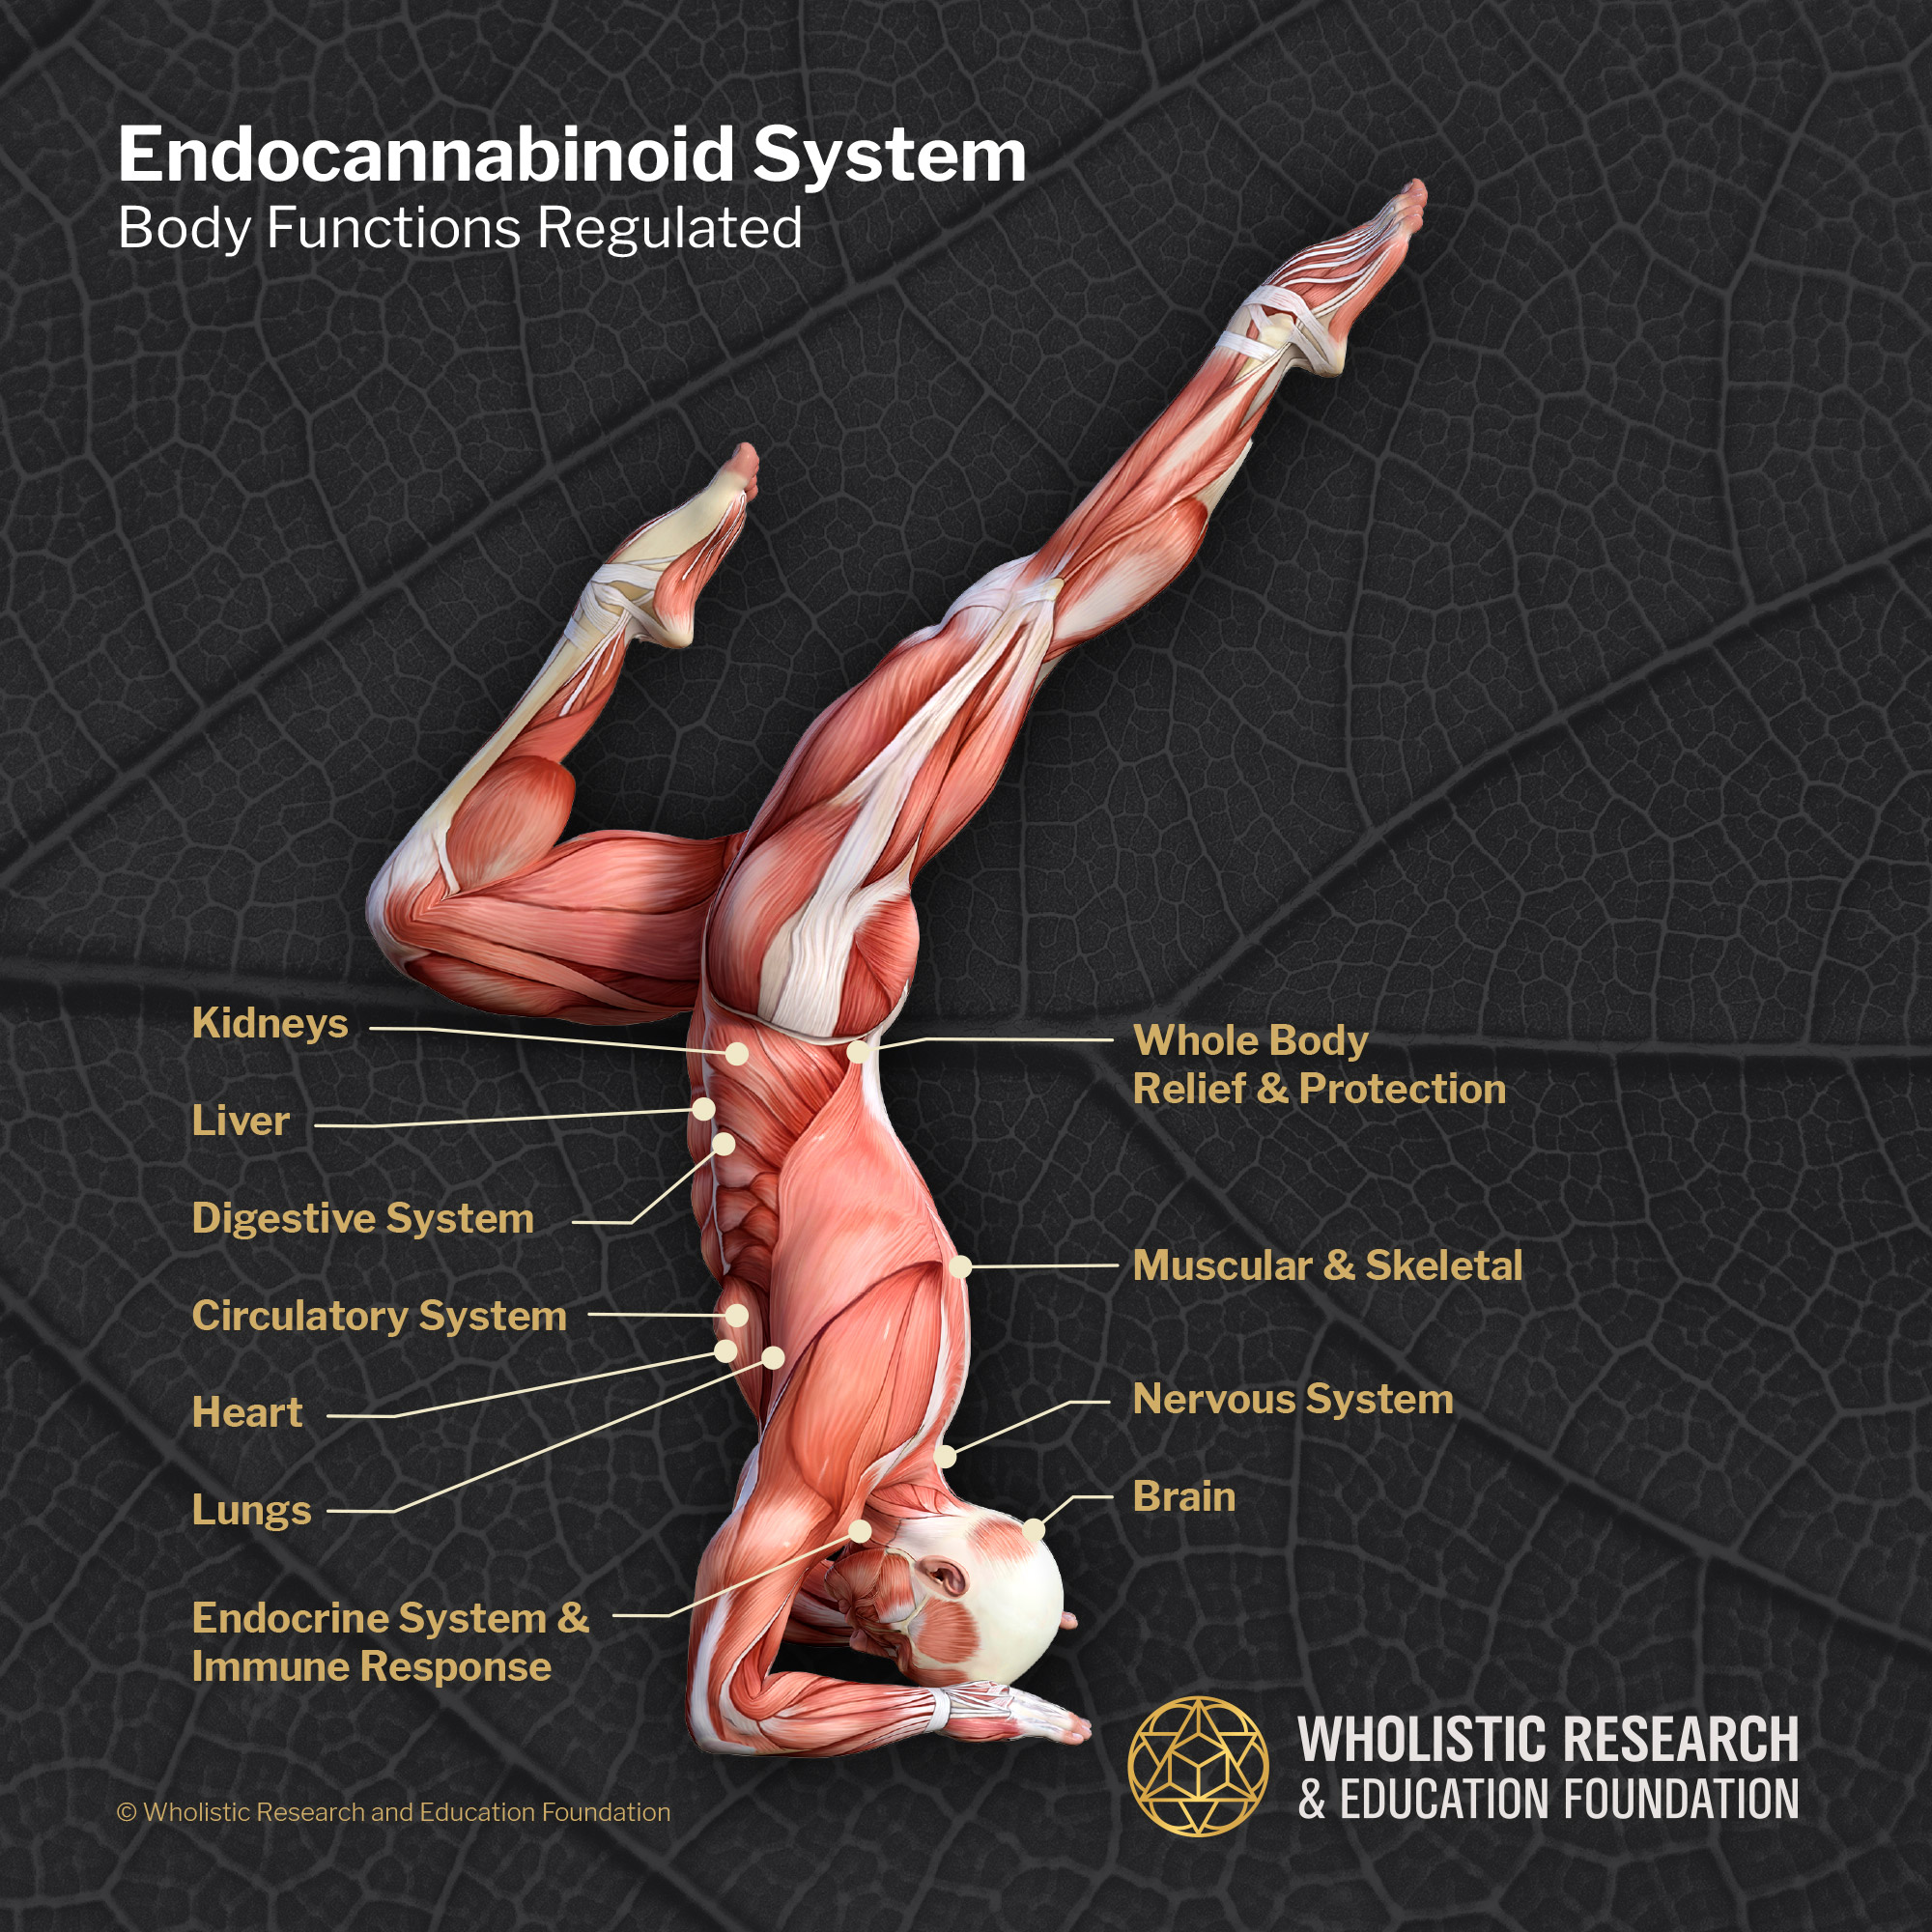 Body functions regulated by the endocannabinoid system